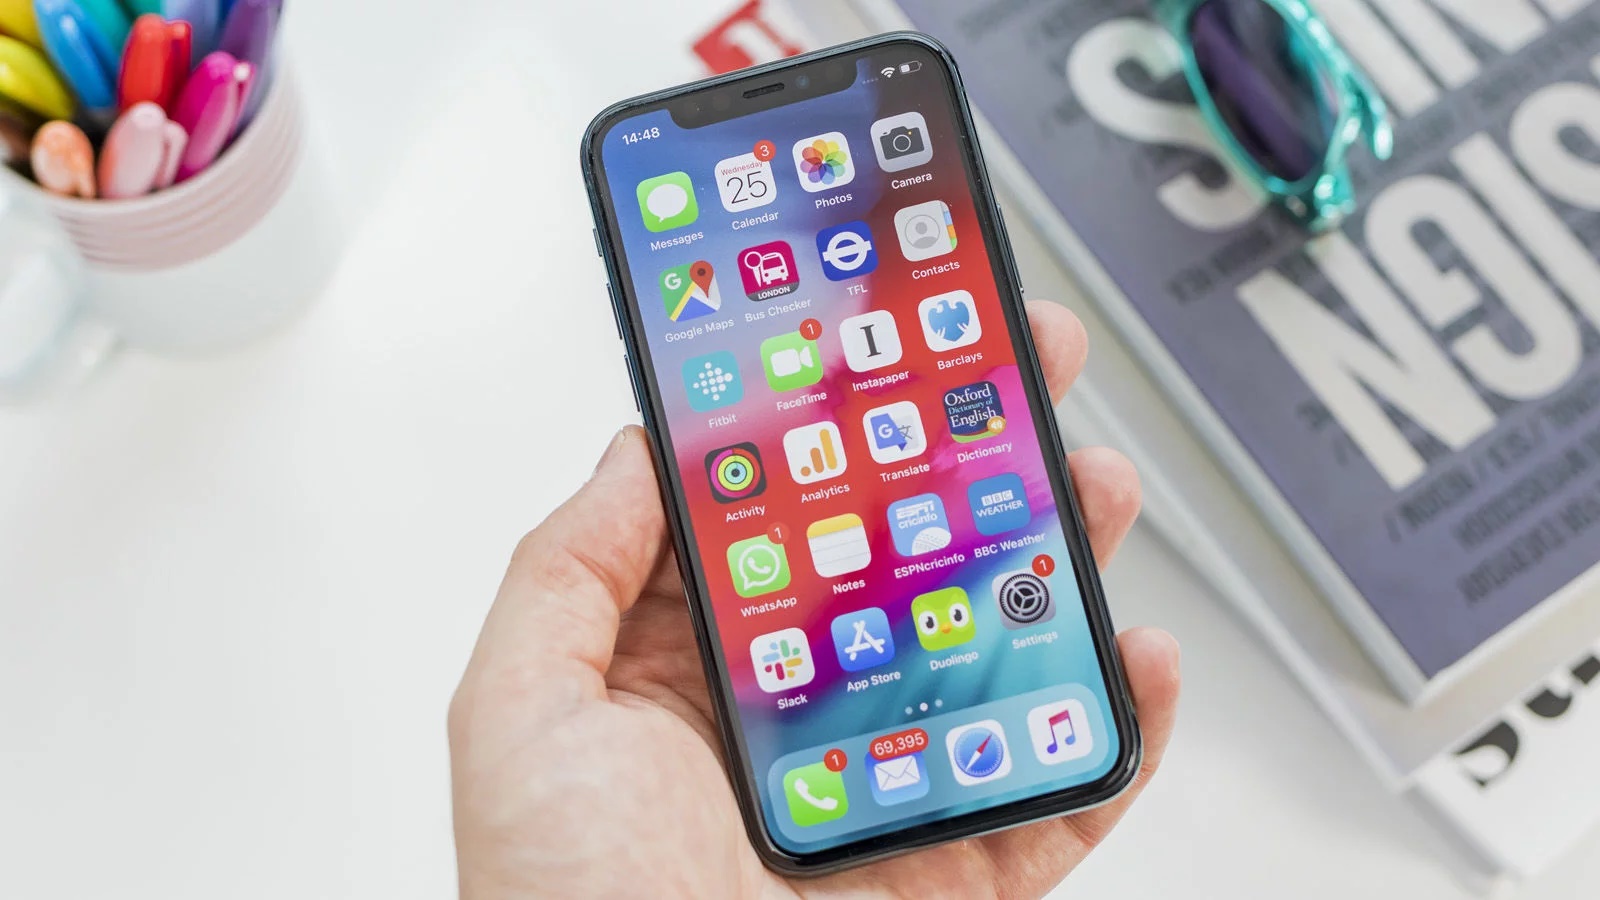 Apple iOS 14 Features, Rumors Mouse Support for iPhone, iPad and Smart Keyboard with Trackpad